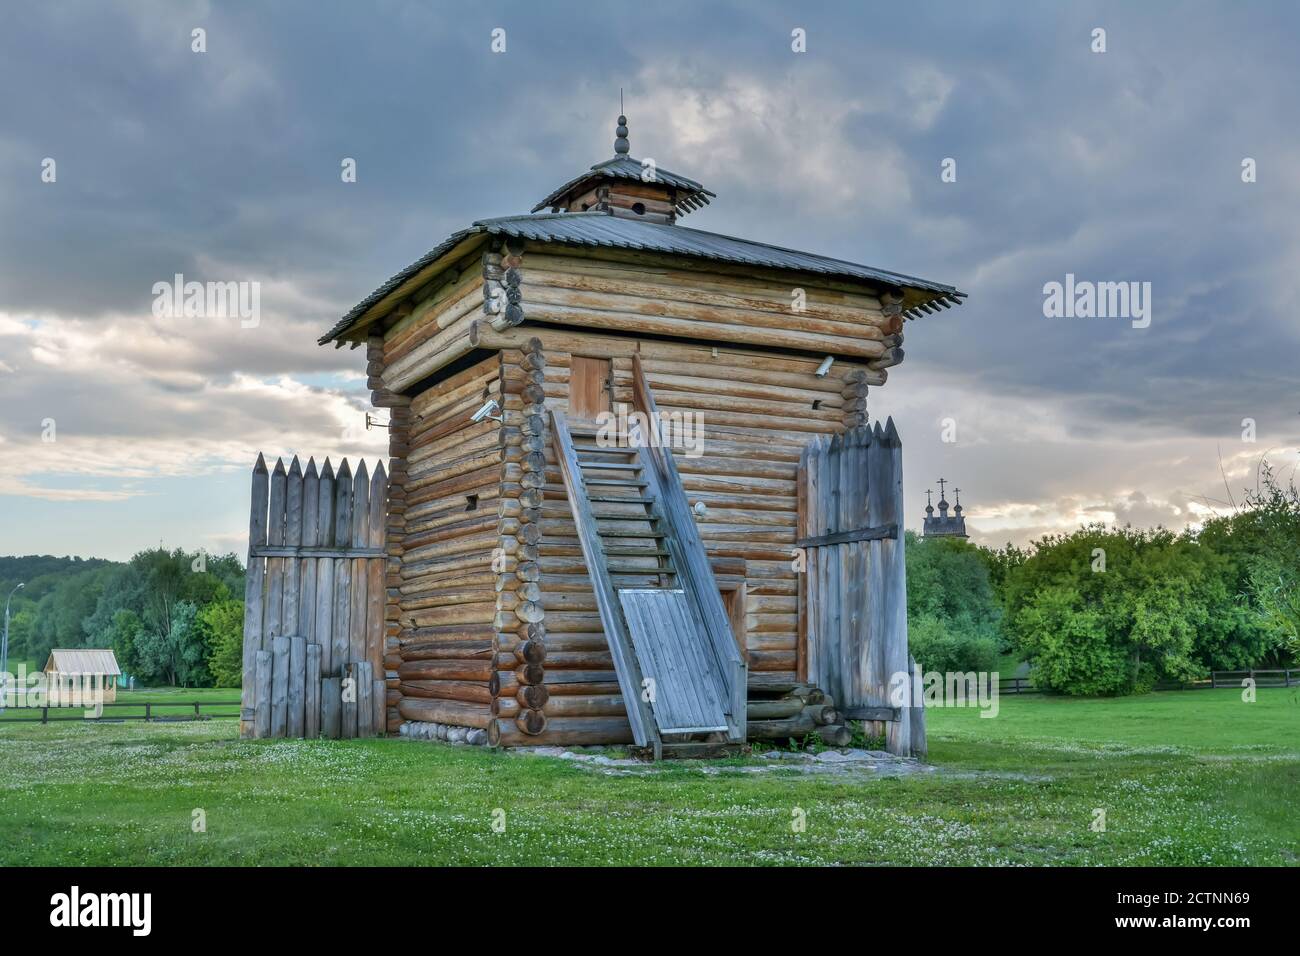 Moscow, Russia – July 6, 2017. Bratsk Stockade Tower at the Kolomenskoe museum-reserve in Moscow. Stock Photo